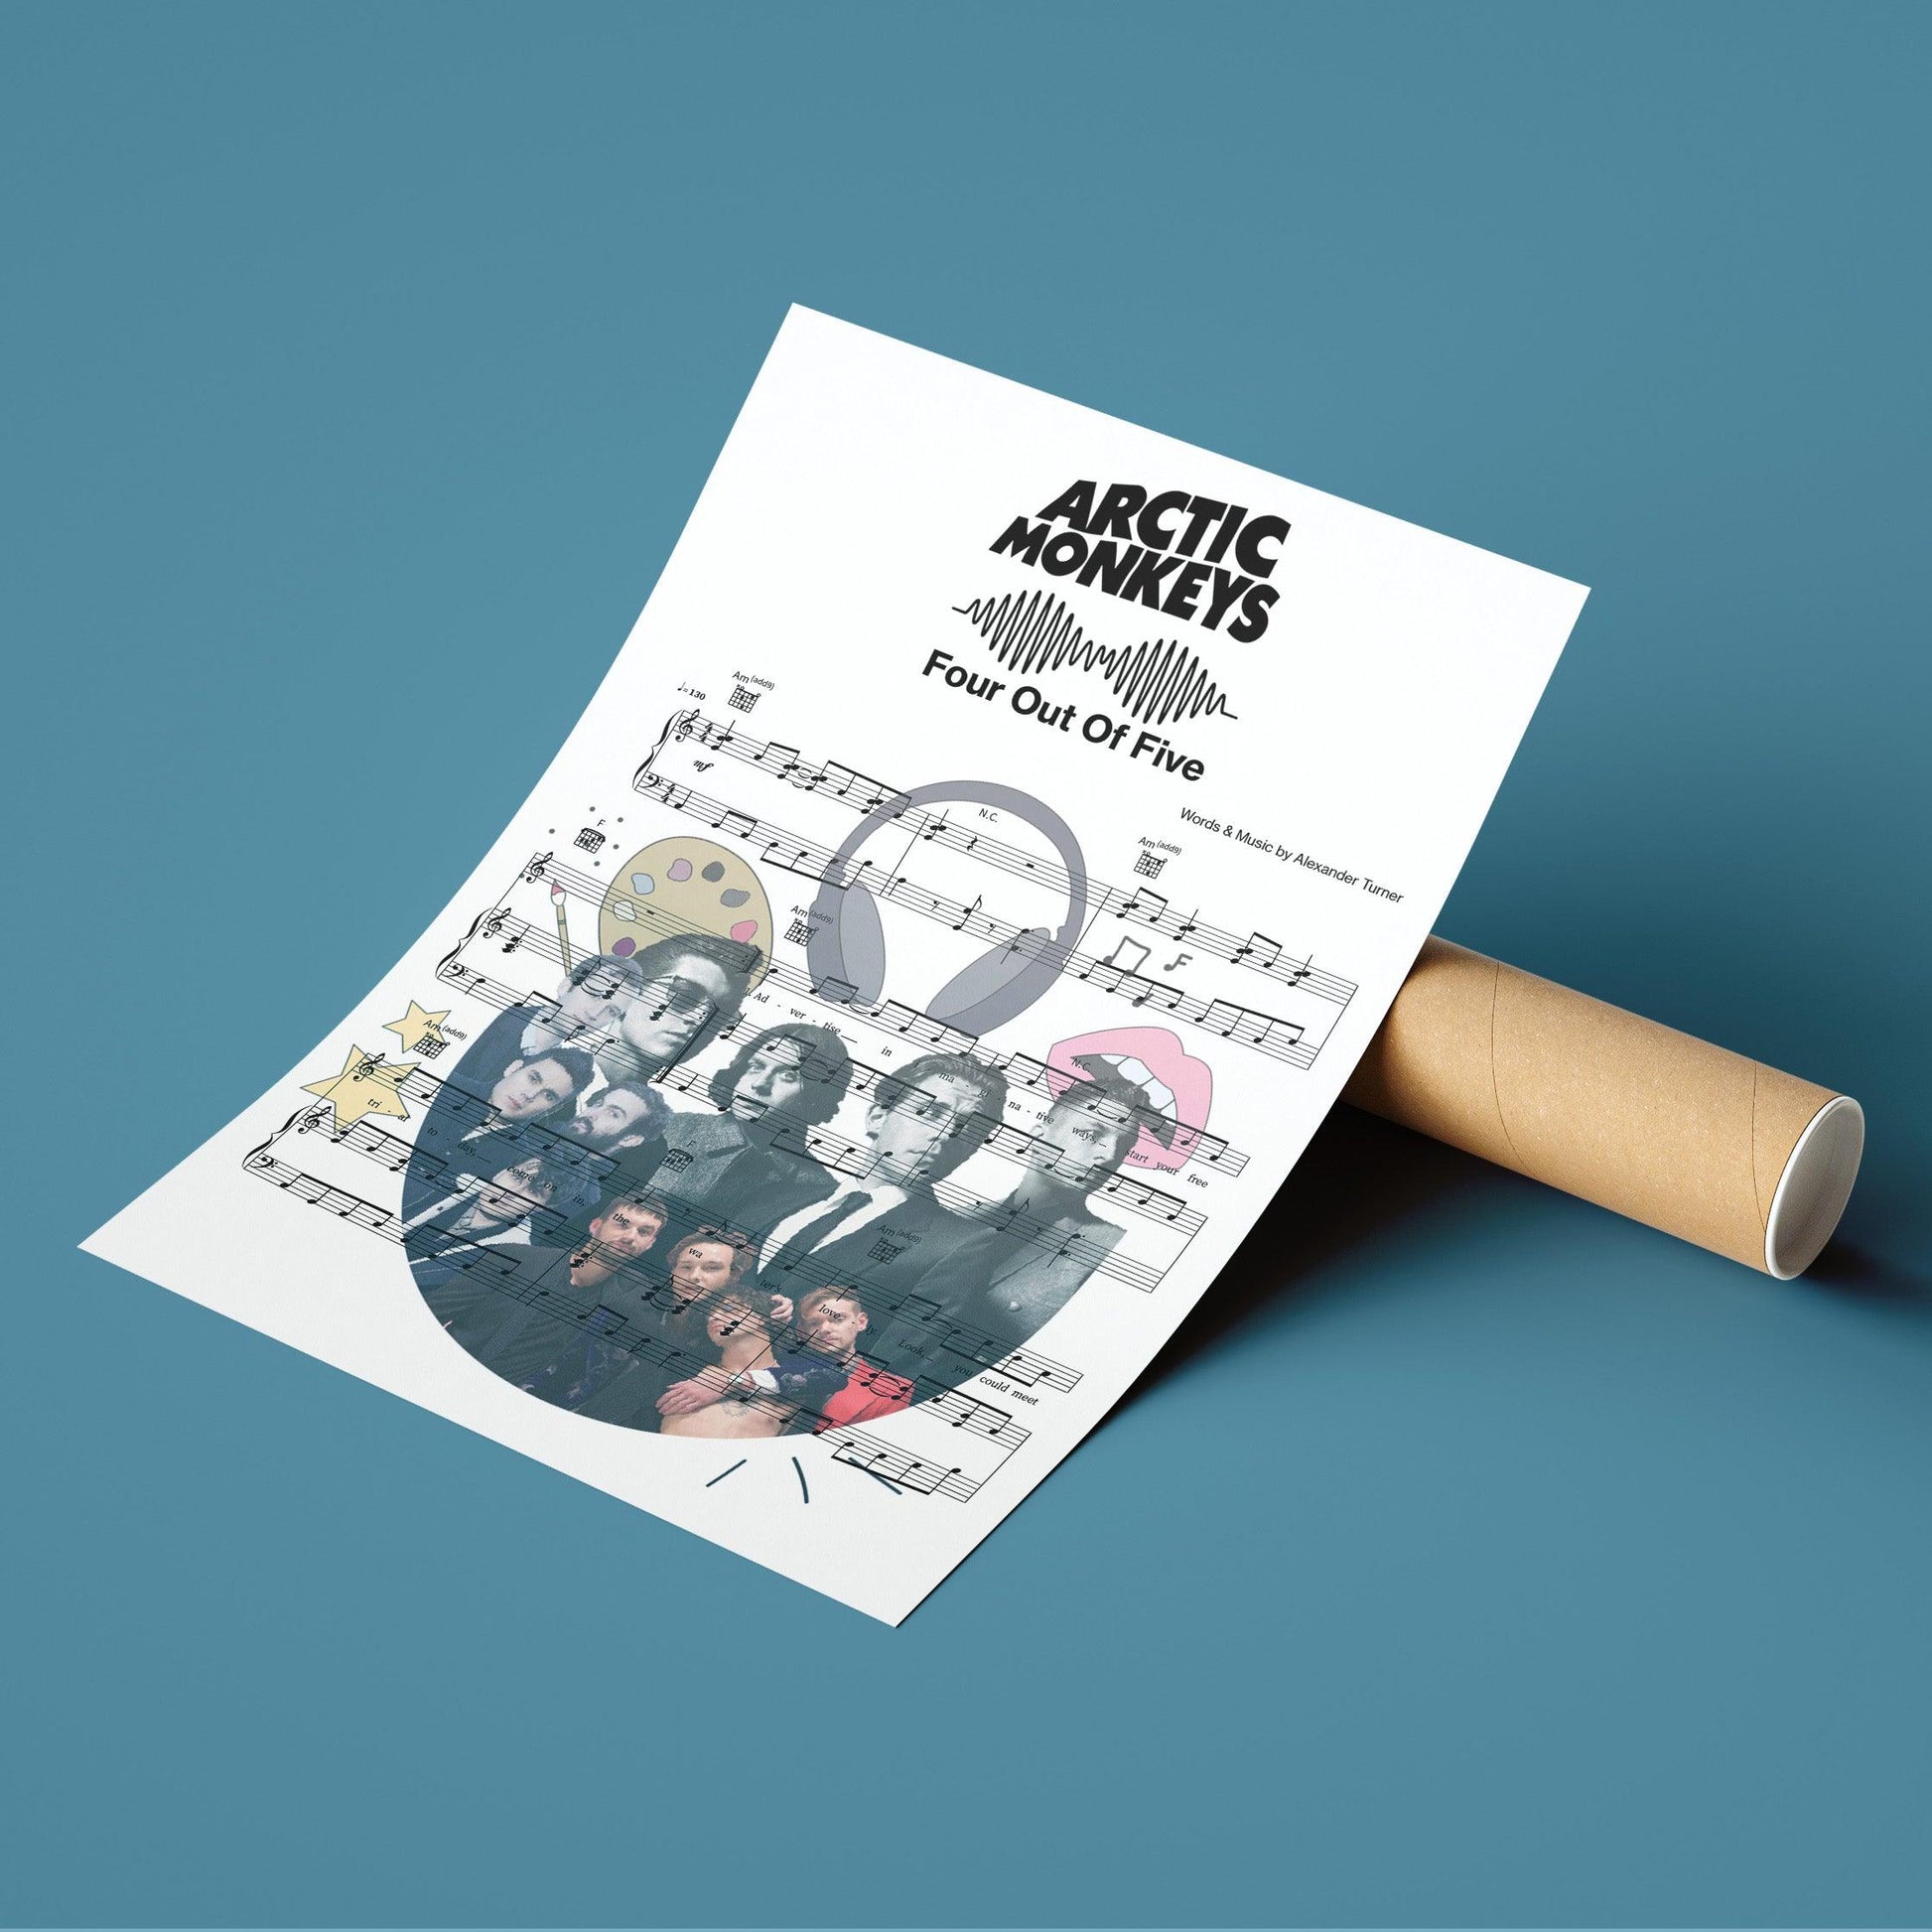 Arctic monkeys - Four out of five Poster | Song Music Sheet Notes Print Everyone has a favorite song especially Arctic monkeys Print, and now you can show the score as printed staff. The personal favorite song sheet print shows the song chosen as the score. 